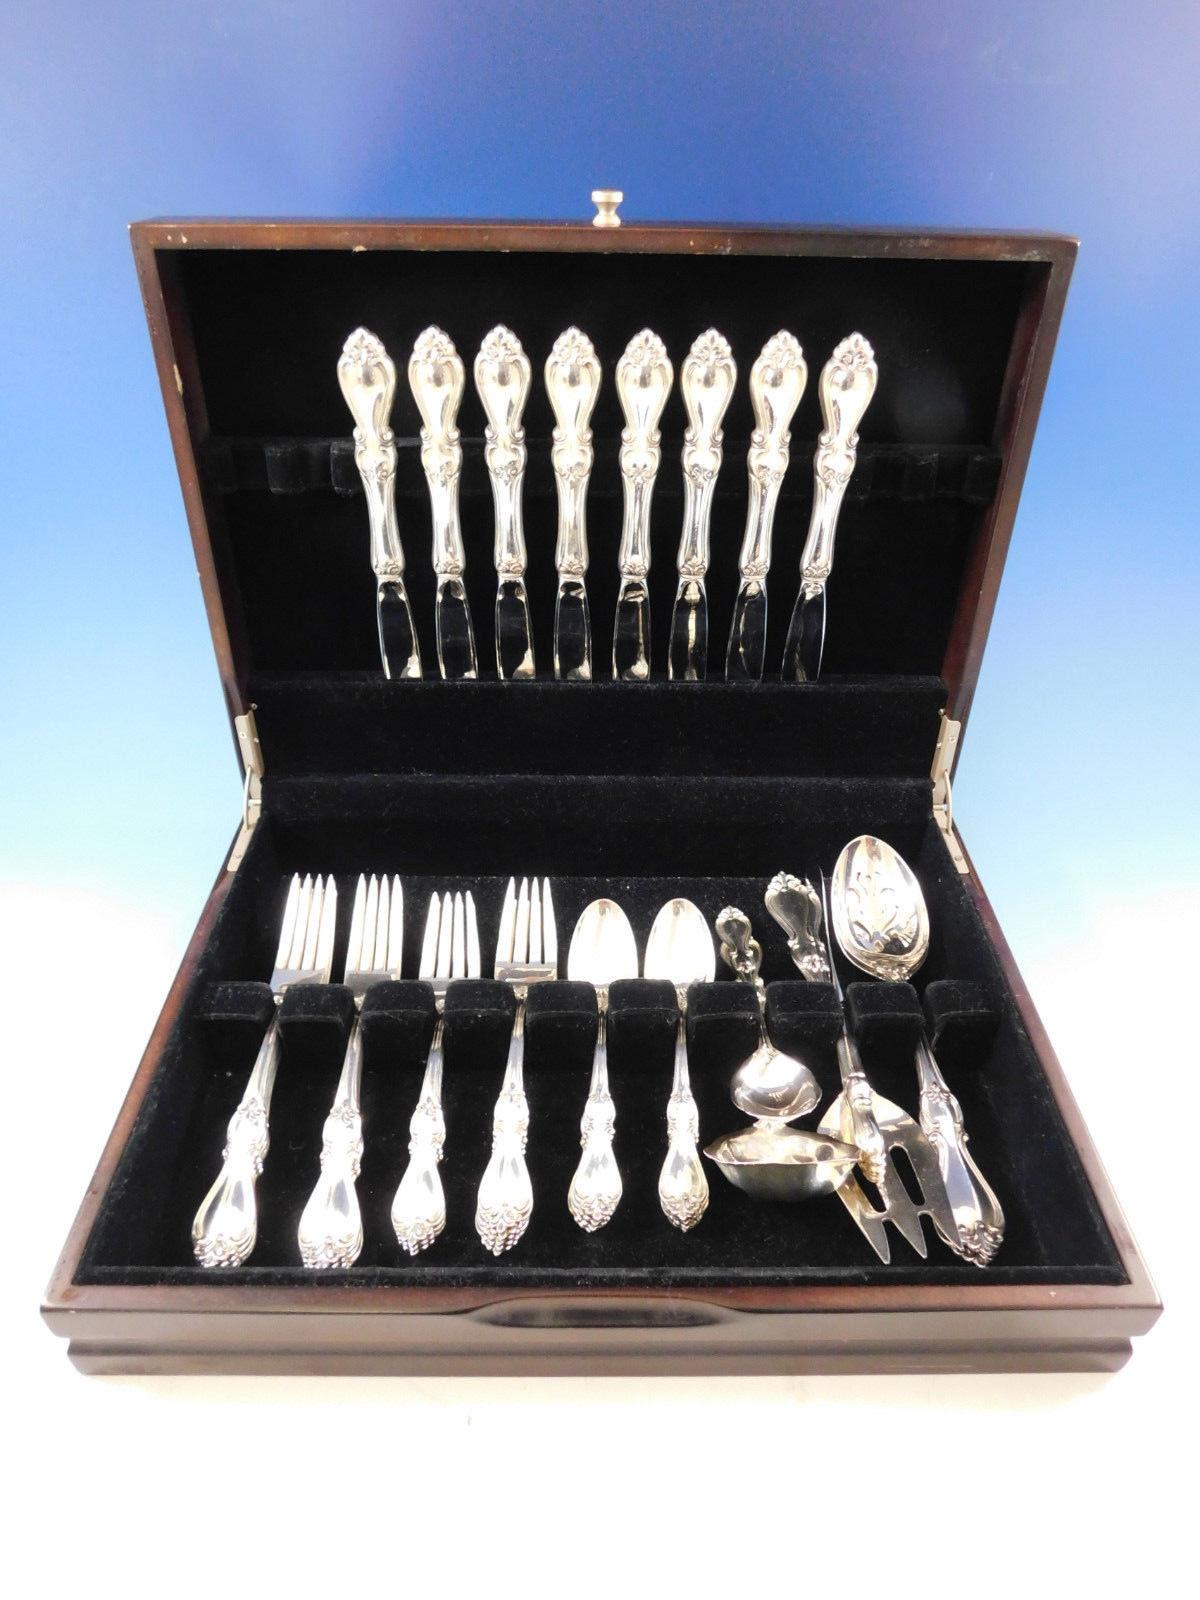 Queen Elizabeth I by Towle sterling silver flatware set - 38 pieces. This set includes:

8 knives, 9